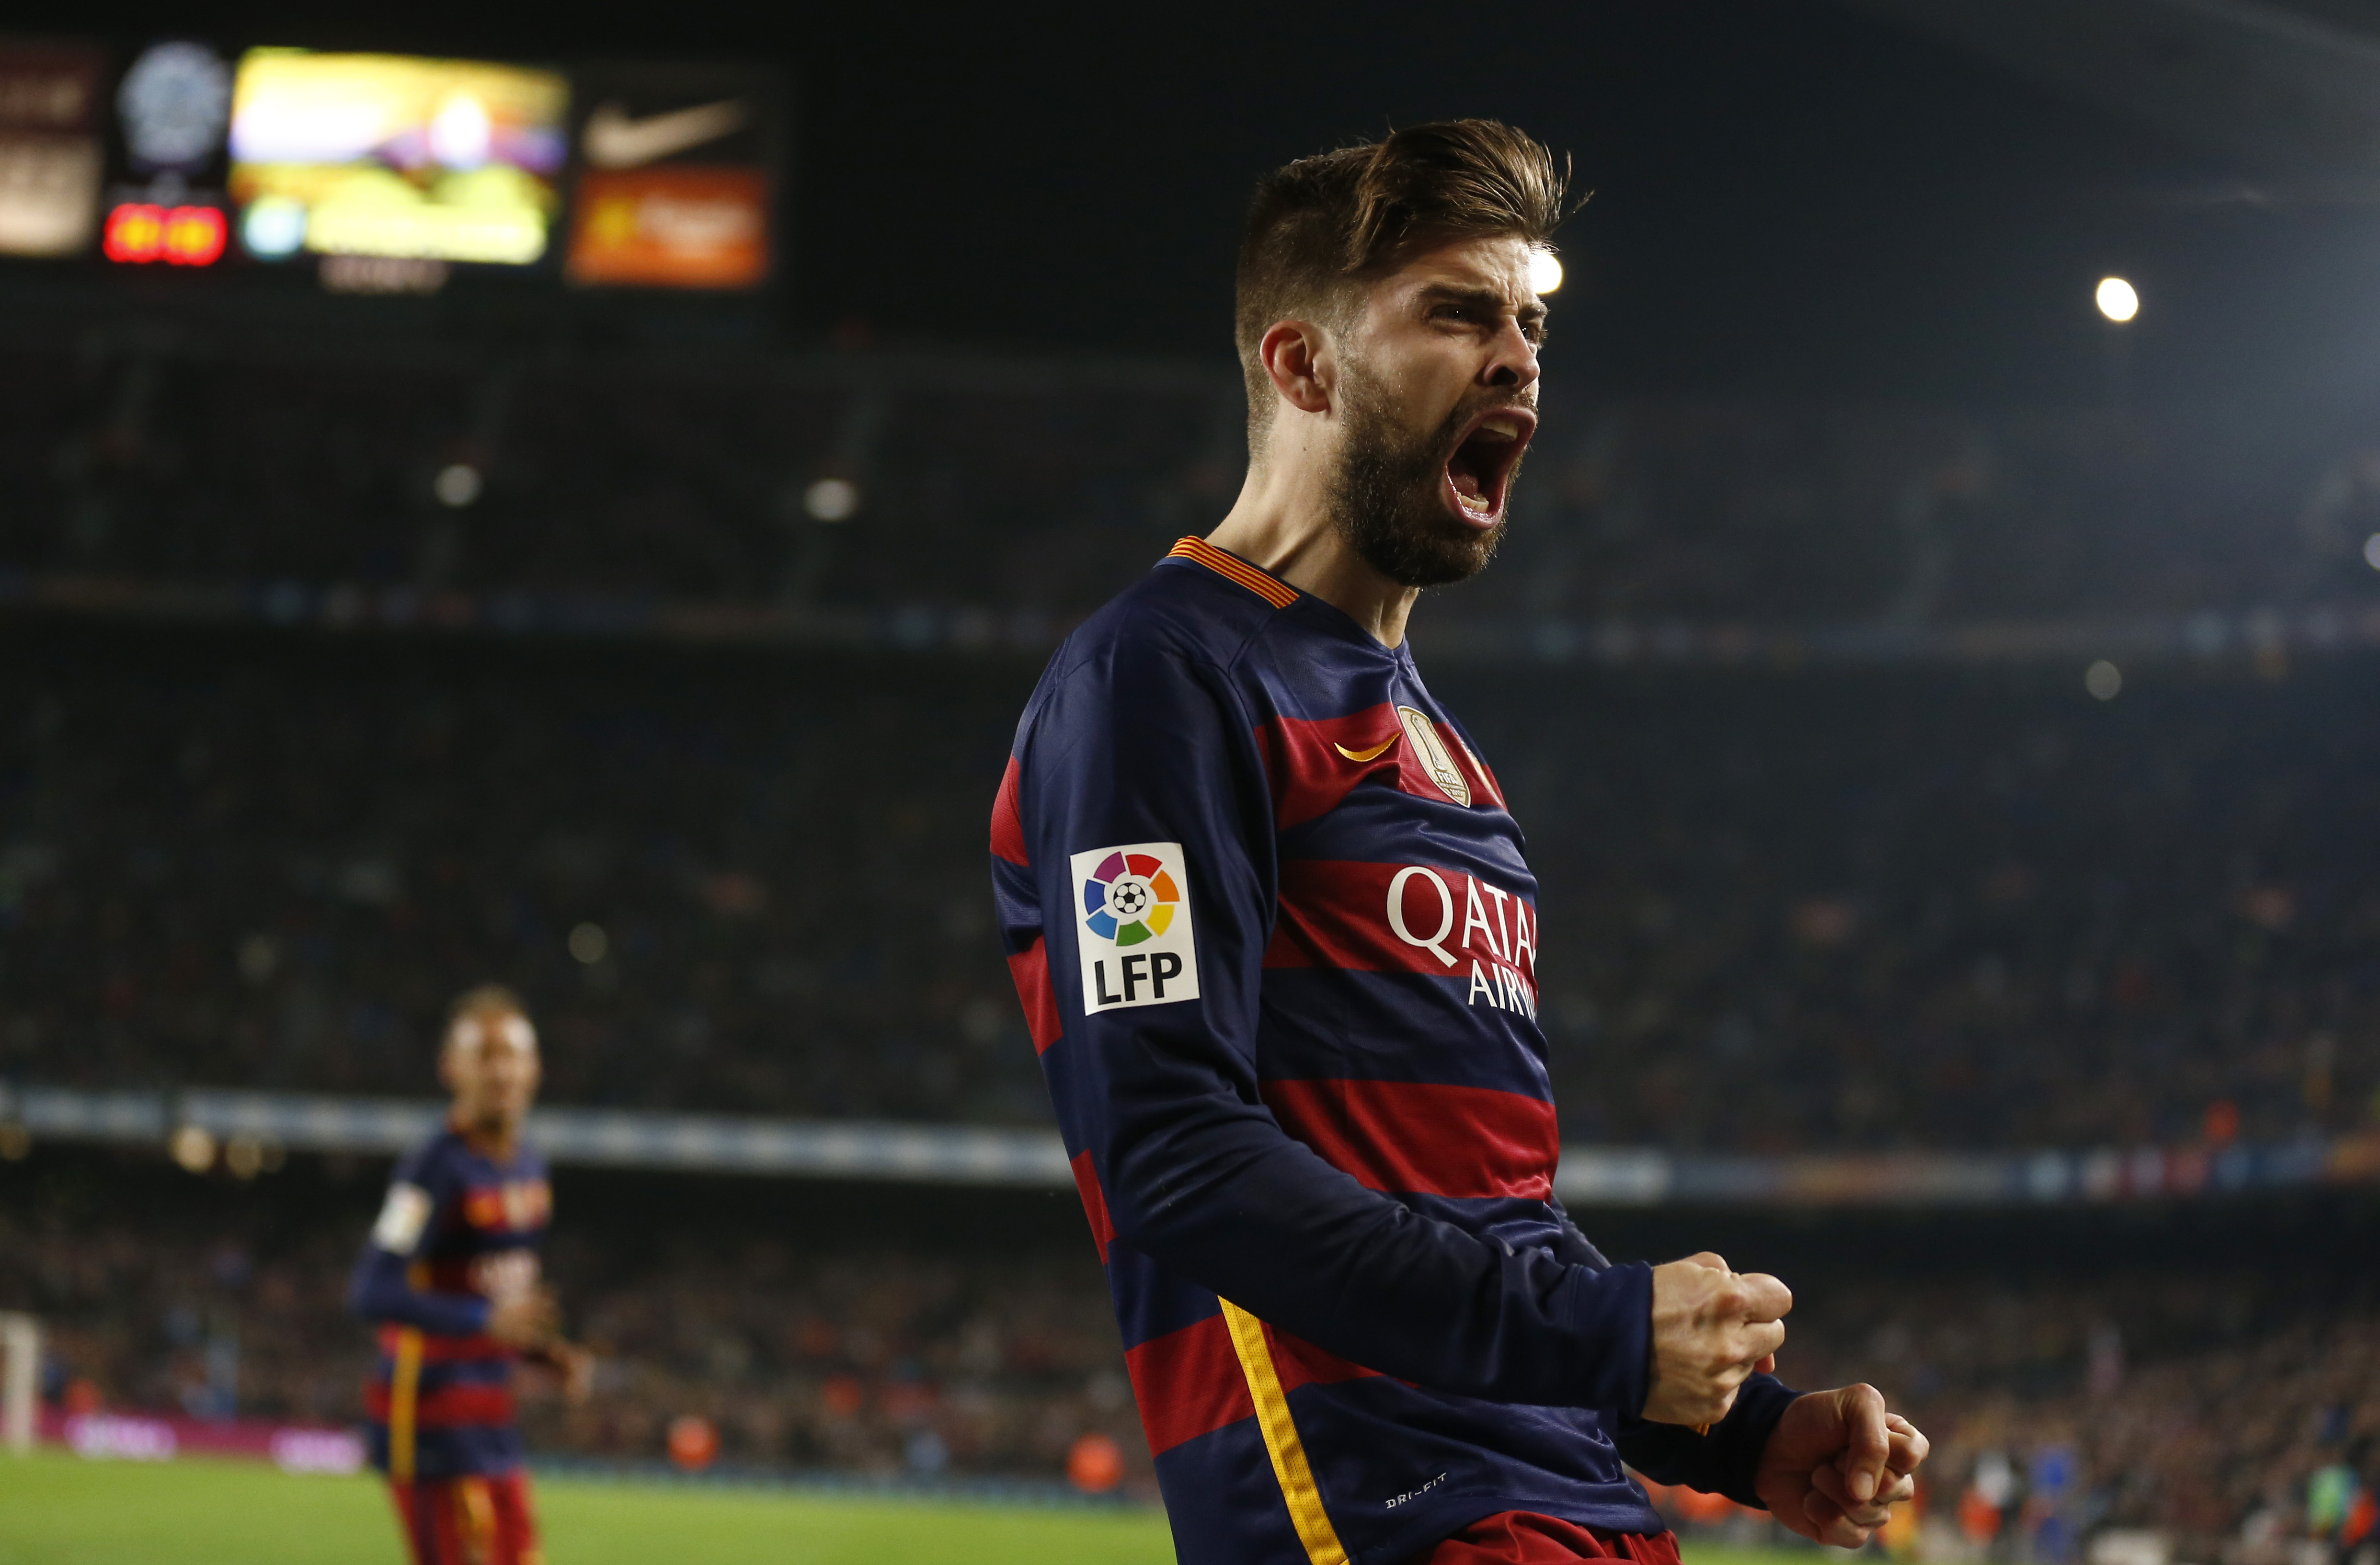 FC Barcelona's Gerard Pique reacts after scoring against Athletic Bilbao scored during a quarterfinal, second leg, Copa del Rey soccer match at the Camp Nou stadium in Barcelona, Spain, Wednesday, Jan. 27, 2016. AP File photo.